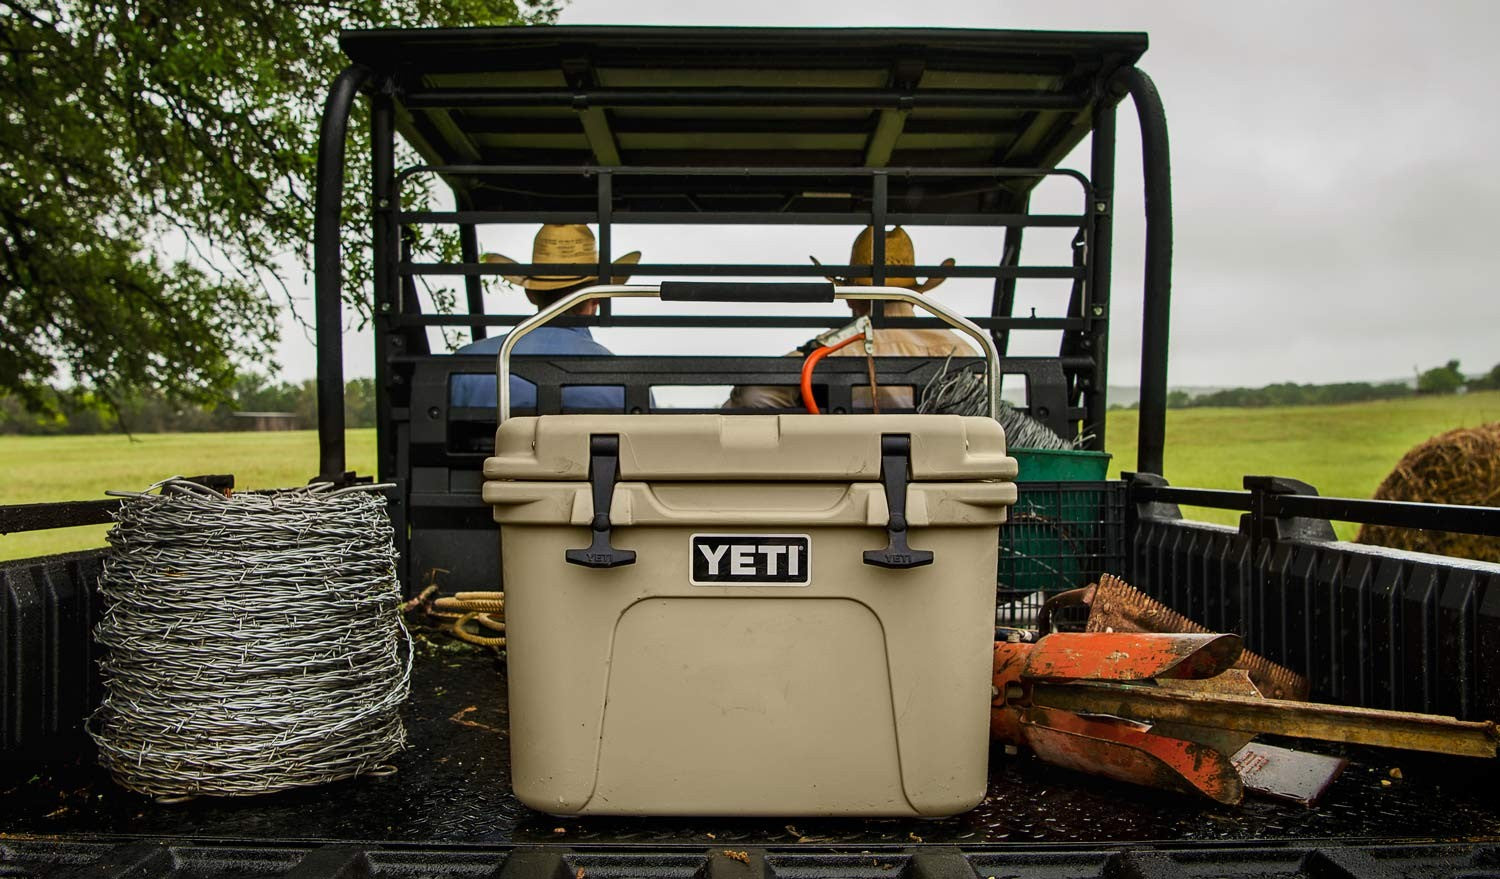 YETI Coolers and Drinkware Now Available!